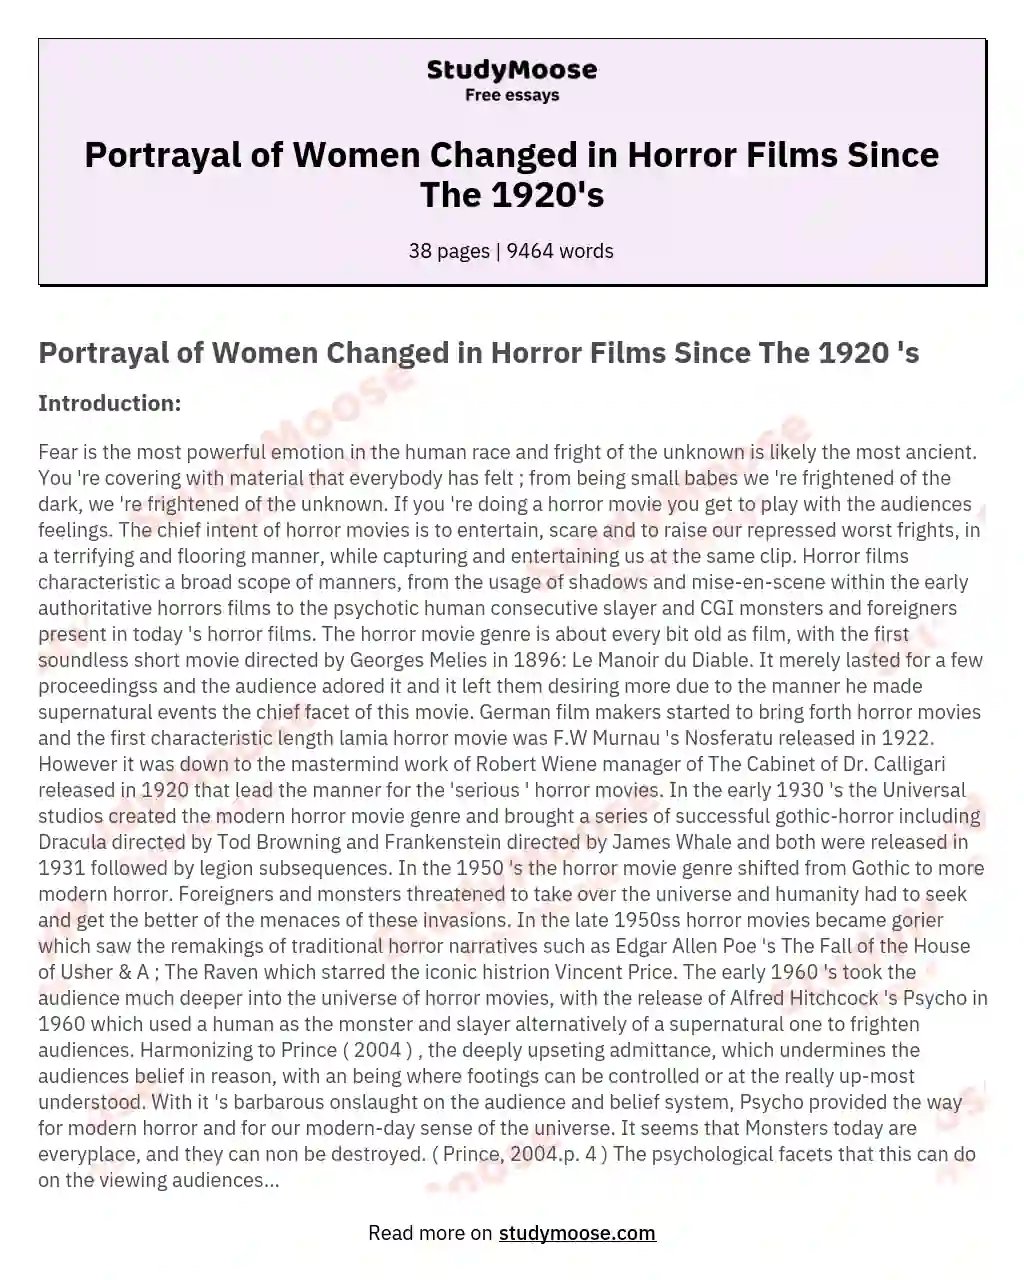 Portrayal of Women Changed in Horror Films Since The 1920's essay